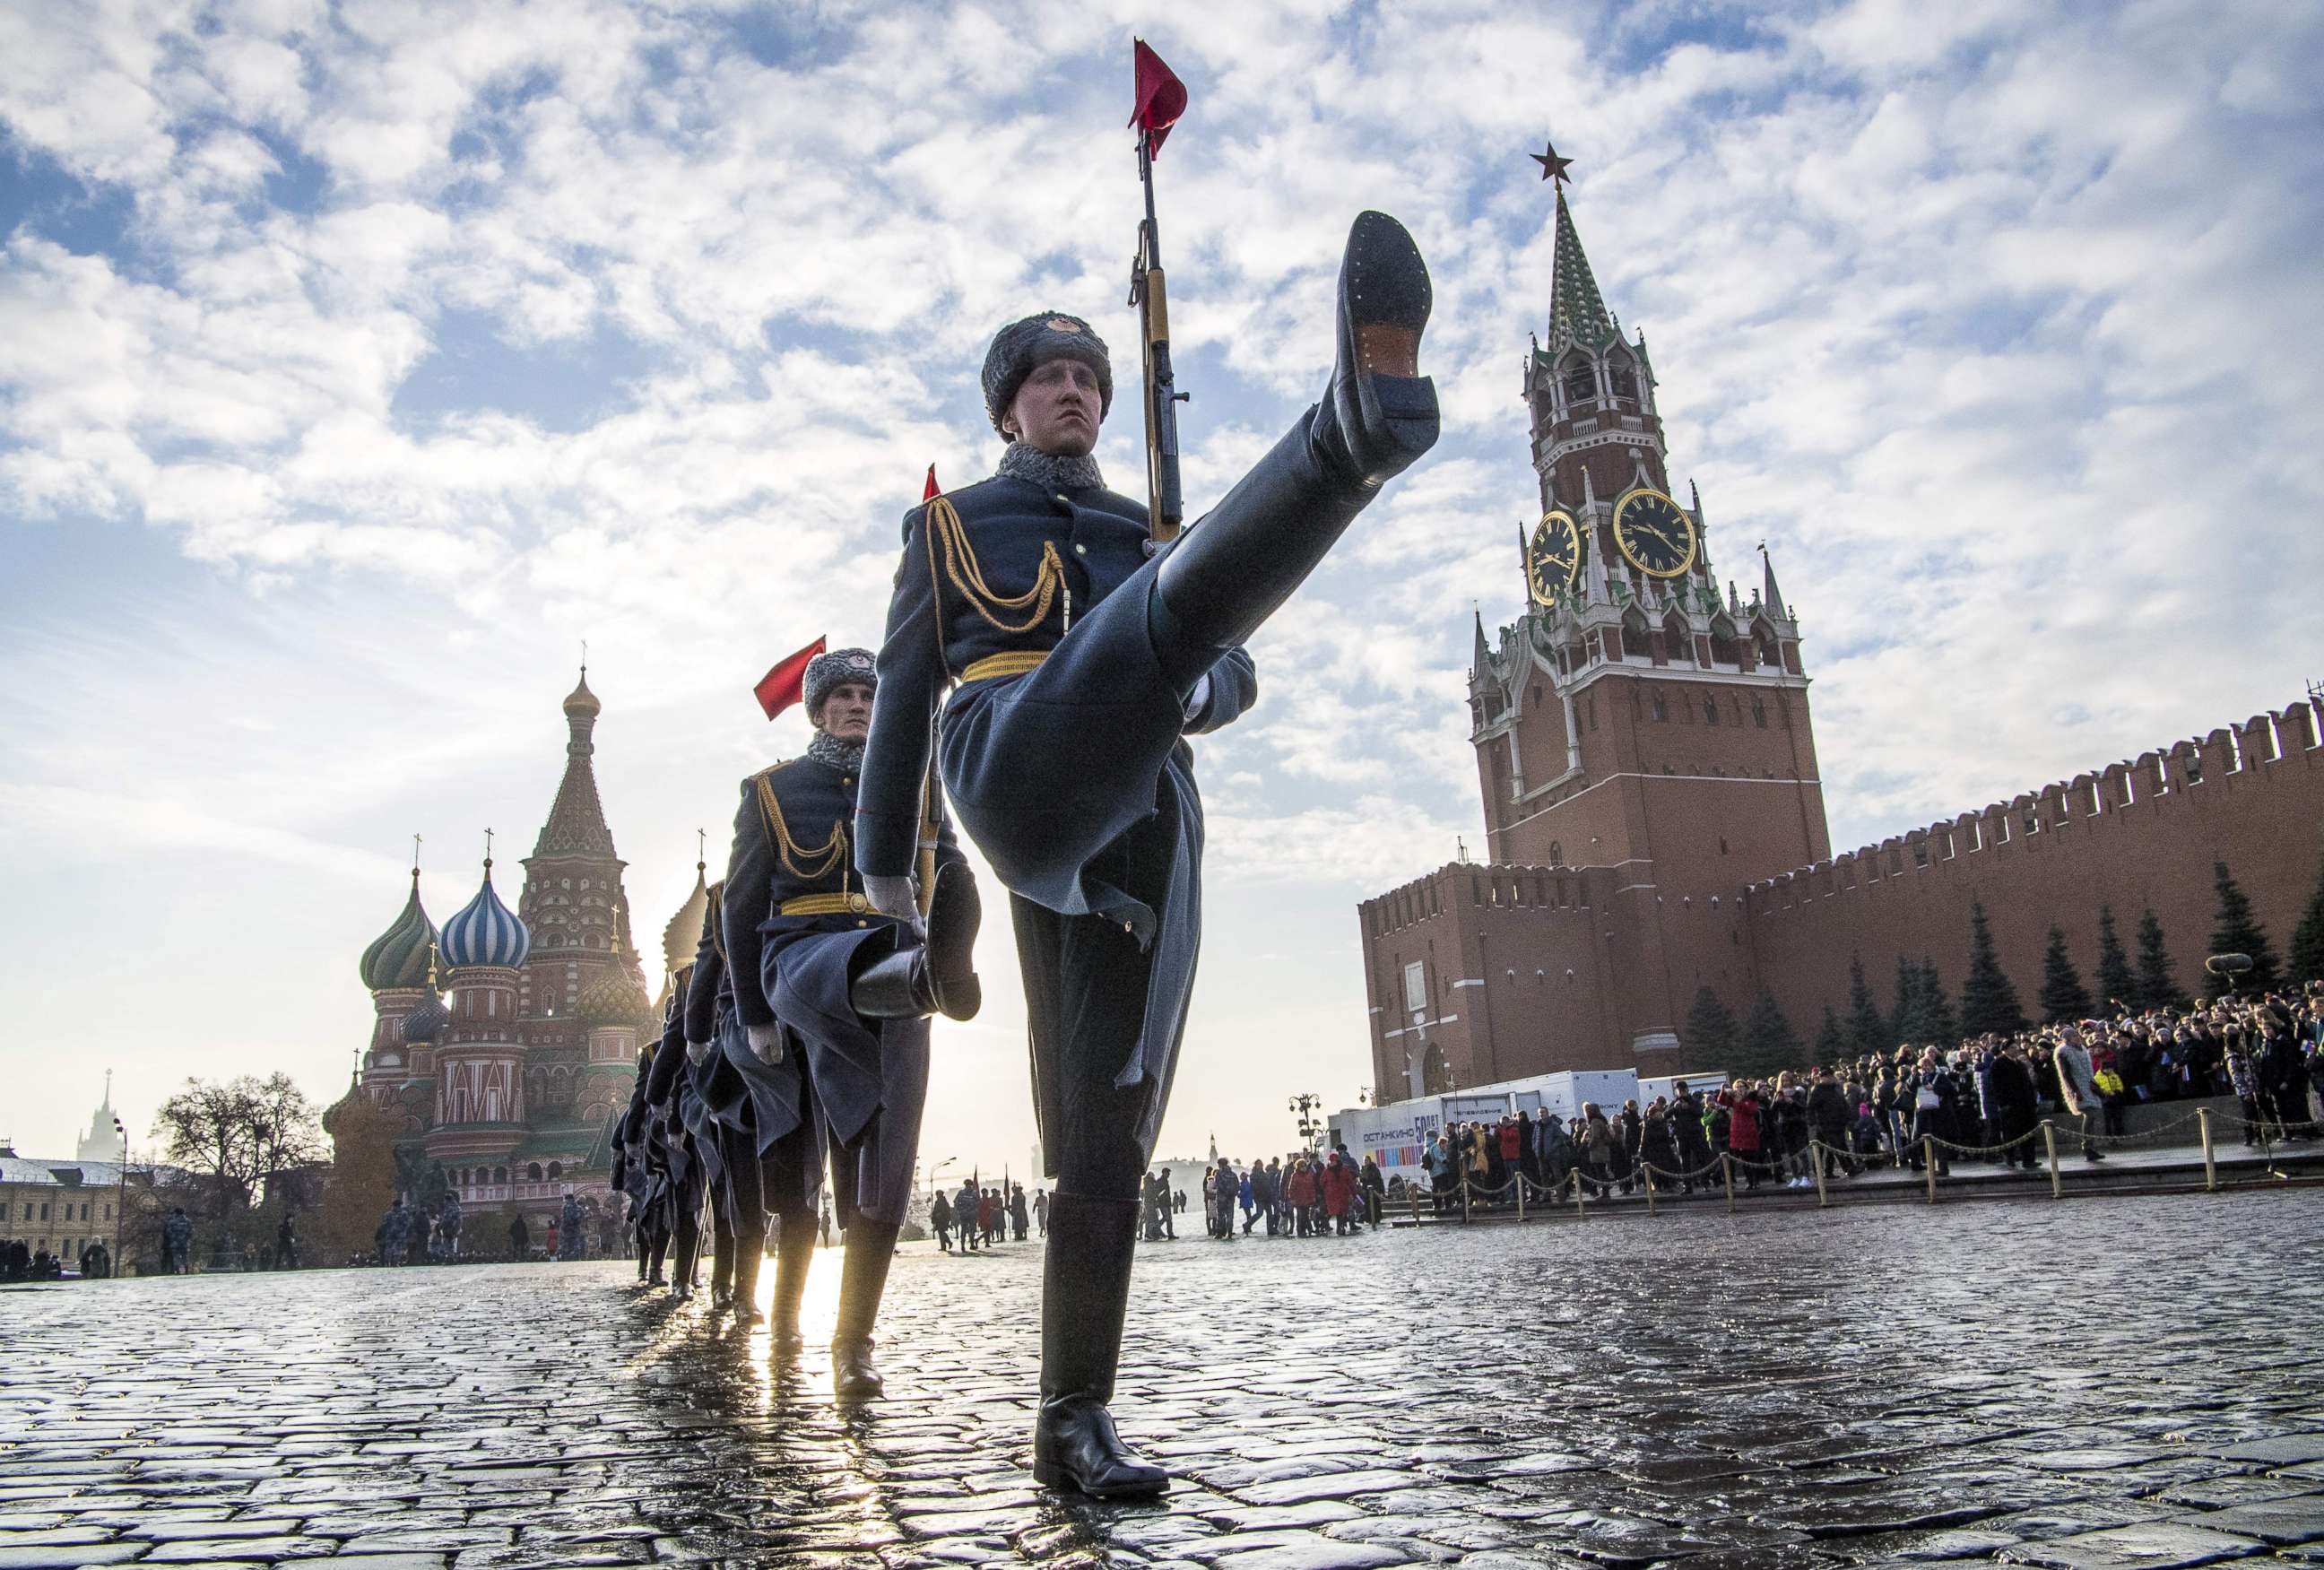 PHOTO: Russian honor guards march during ae military parade in Moscow's Red Square on Nov. 7, 2018.